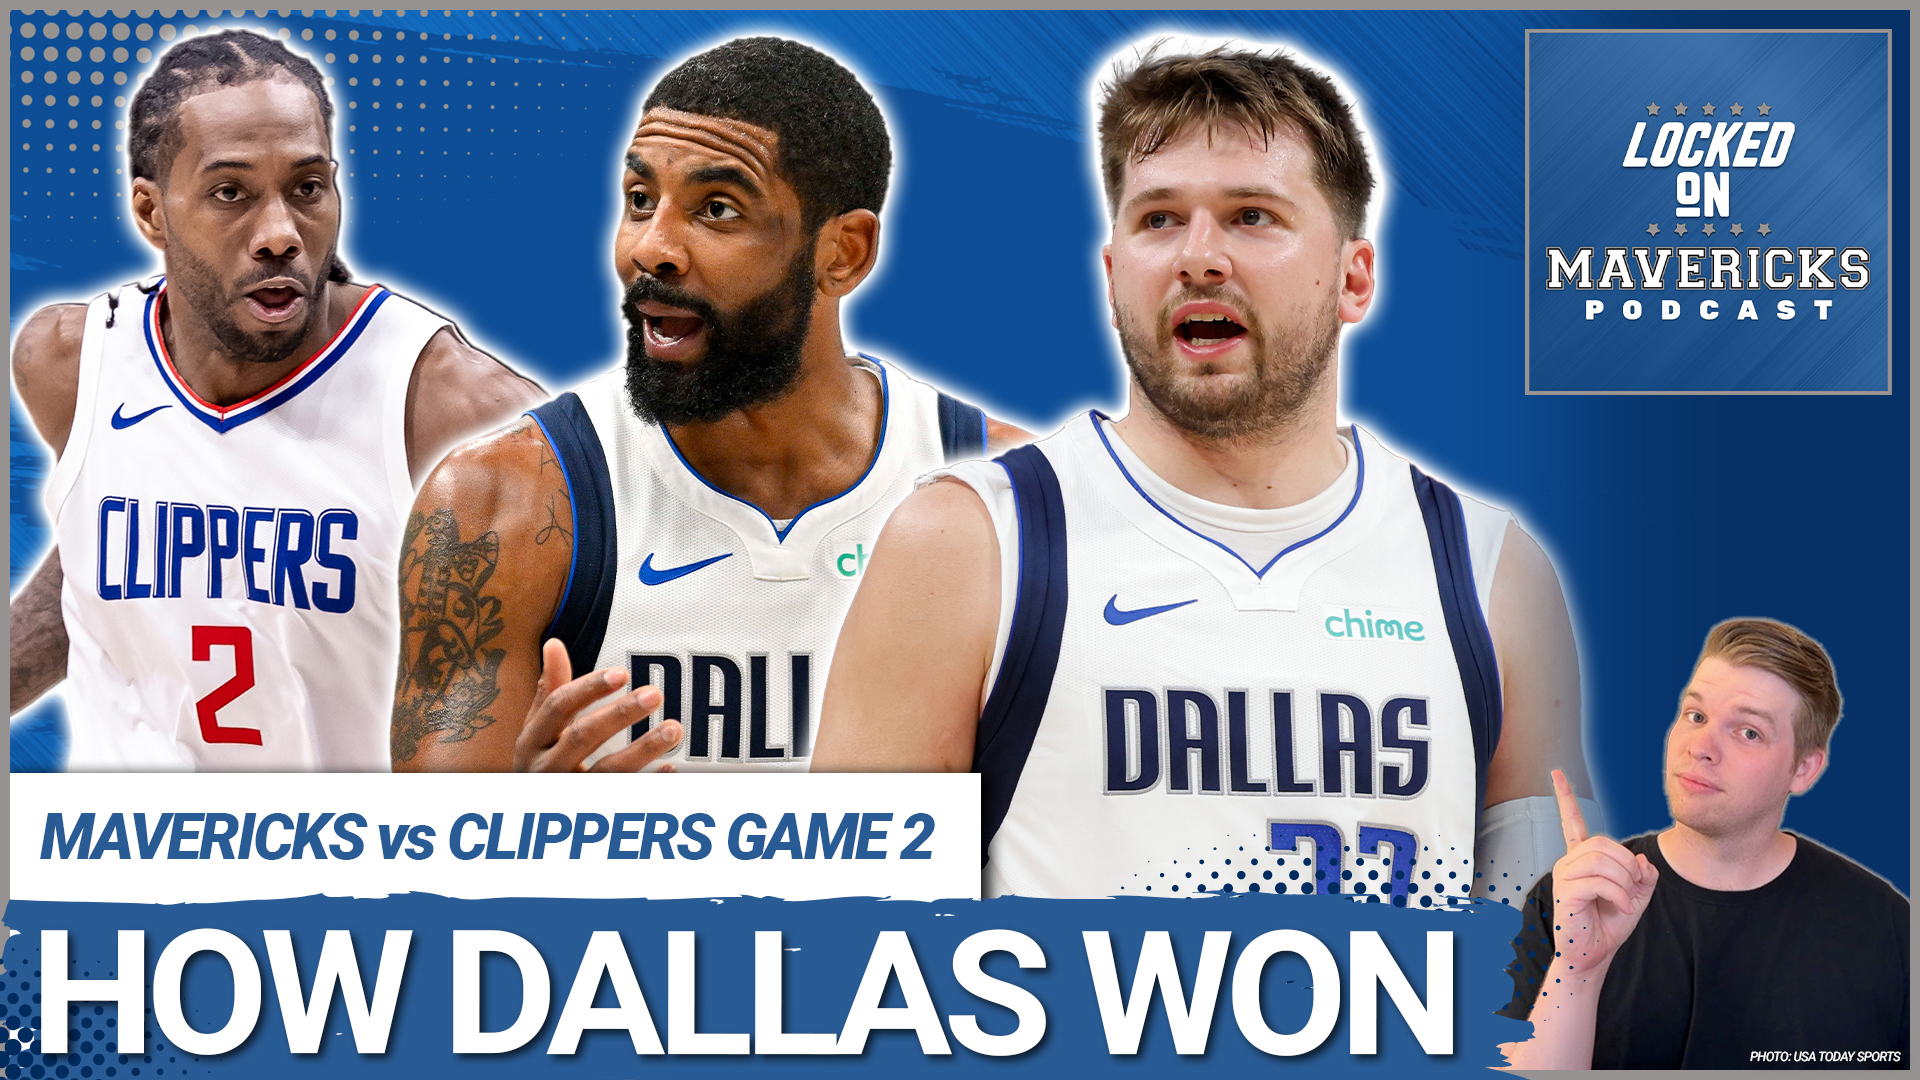 Nick Angstadt shares how the Dallas Mavericks' 14-0 run happened, what Luka Doncic & Kyrie Irving did, and how Kawhi Leonard made the Los Angeles Clippers worse.